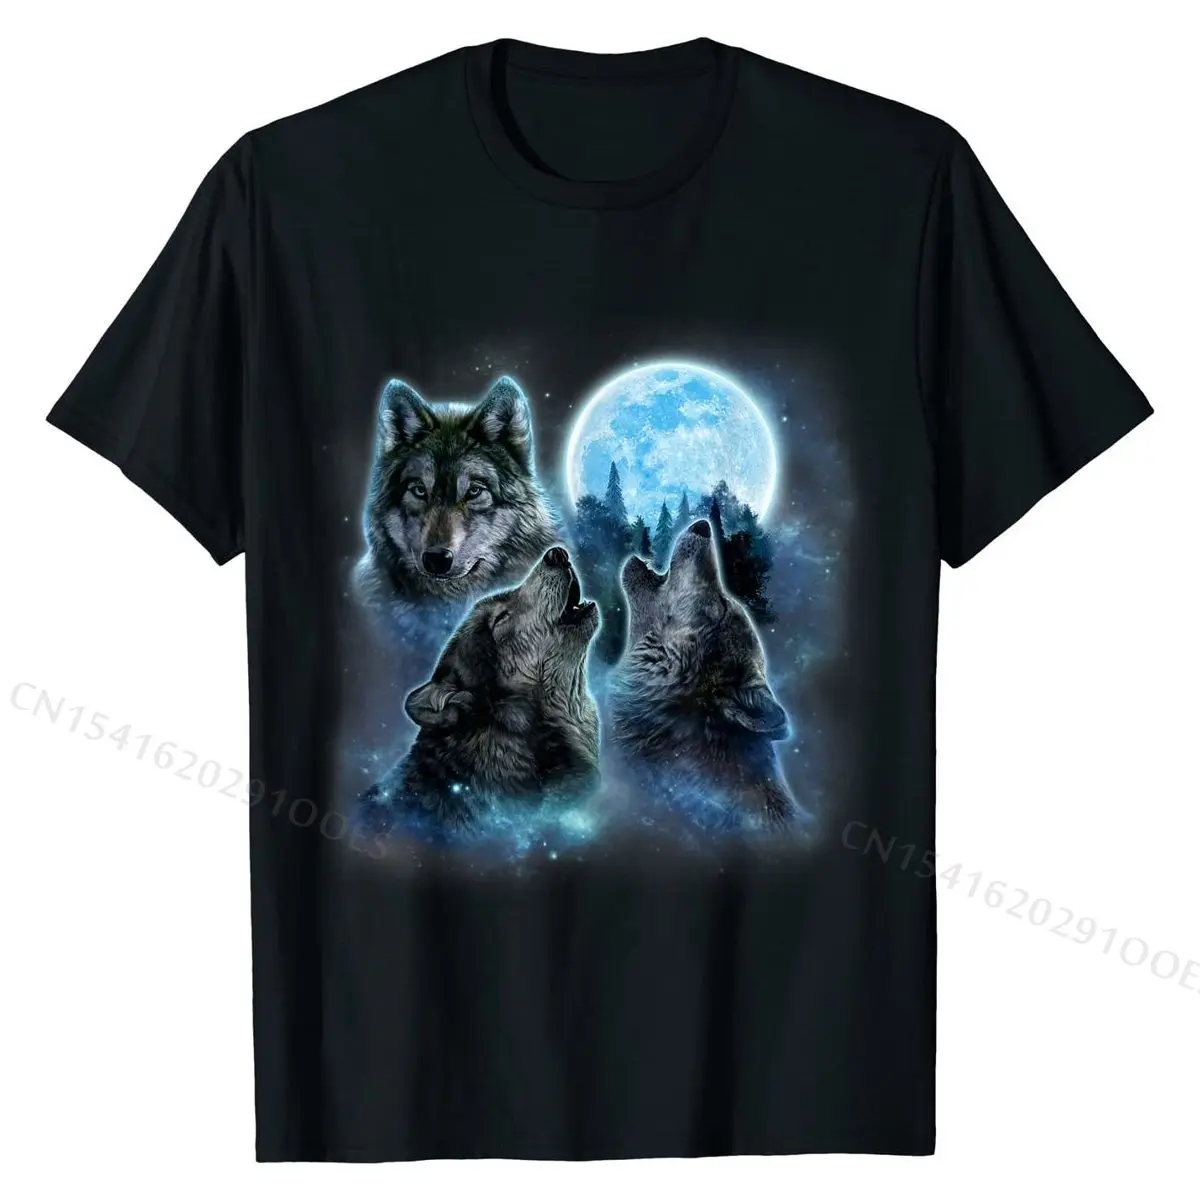 T-Shirt Three Wolves Howling Under Icy Full Moon, Gray Wolf New  Men's Top T-shirts Custom Tops Shirts Cotton Fashionable